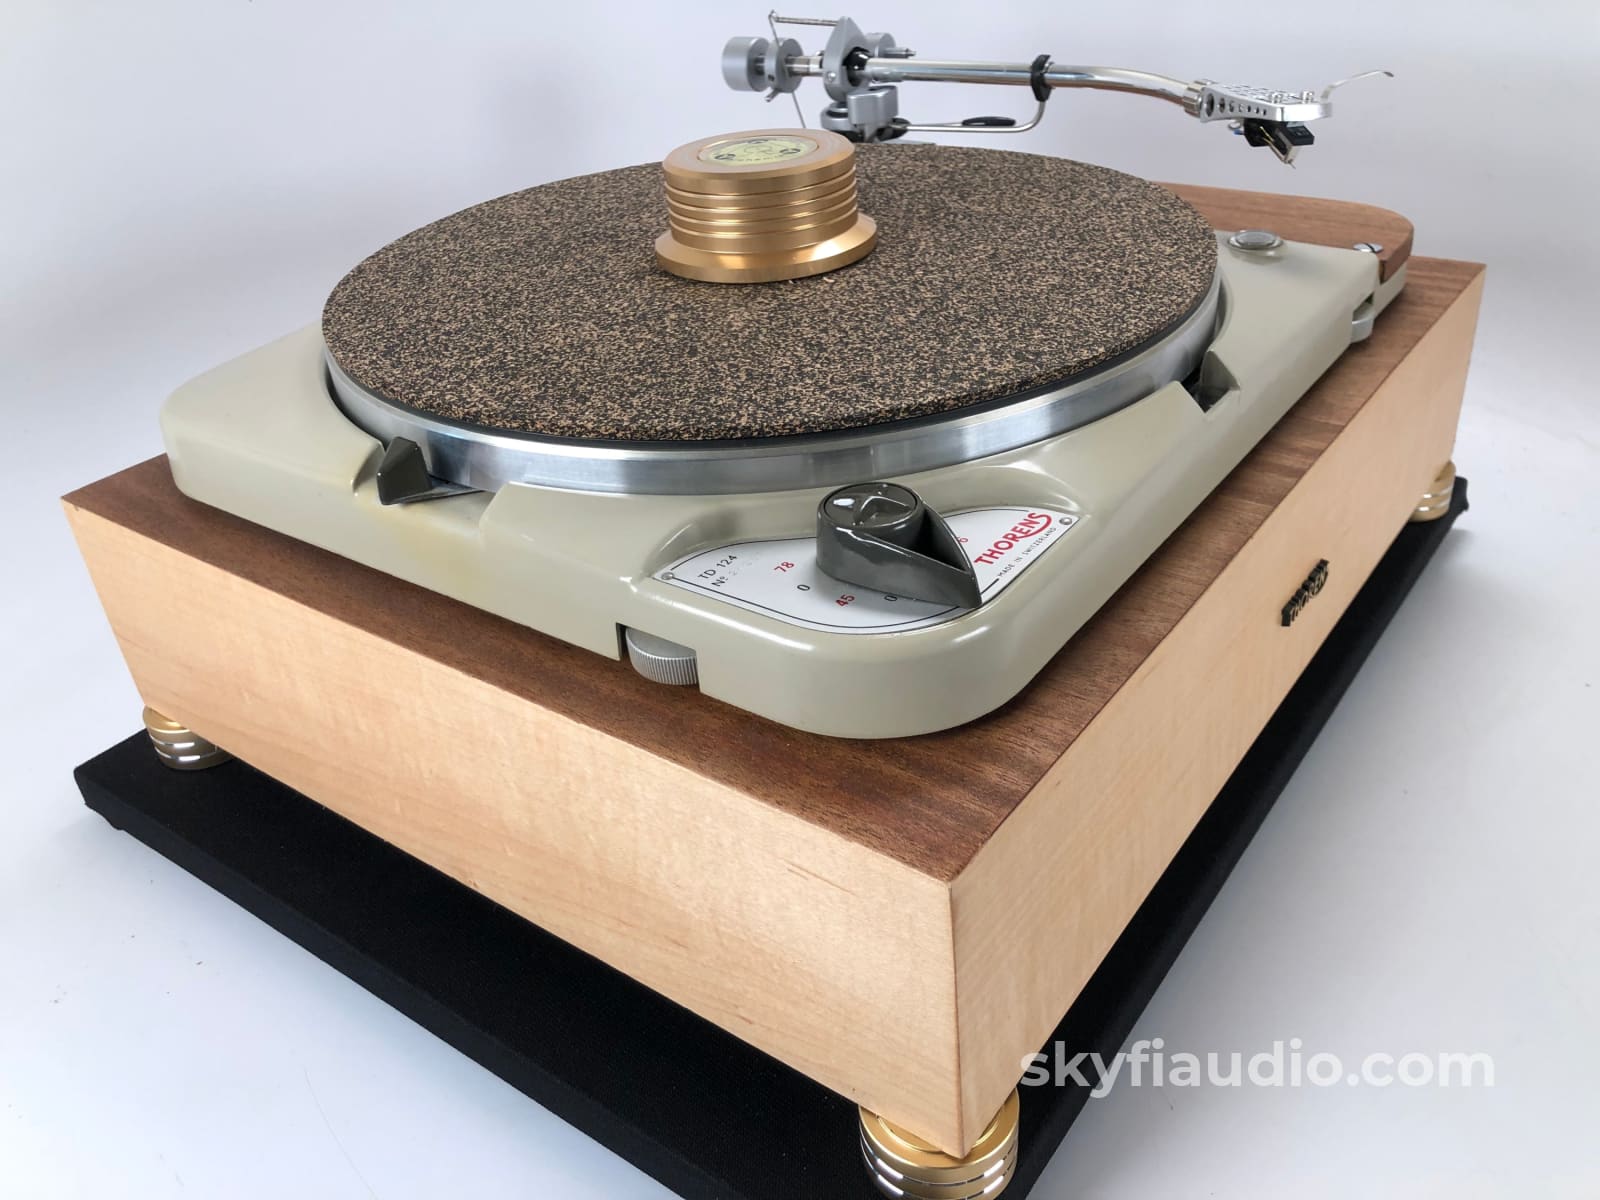 Thorens Td-124 With Plinth And Restored Sme3009 - Completely Customizable Turntable